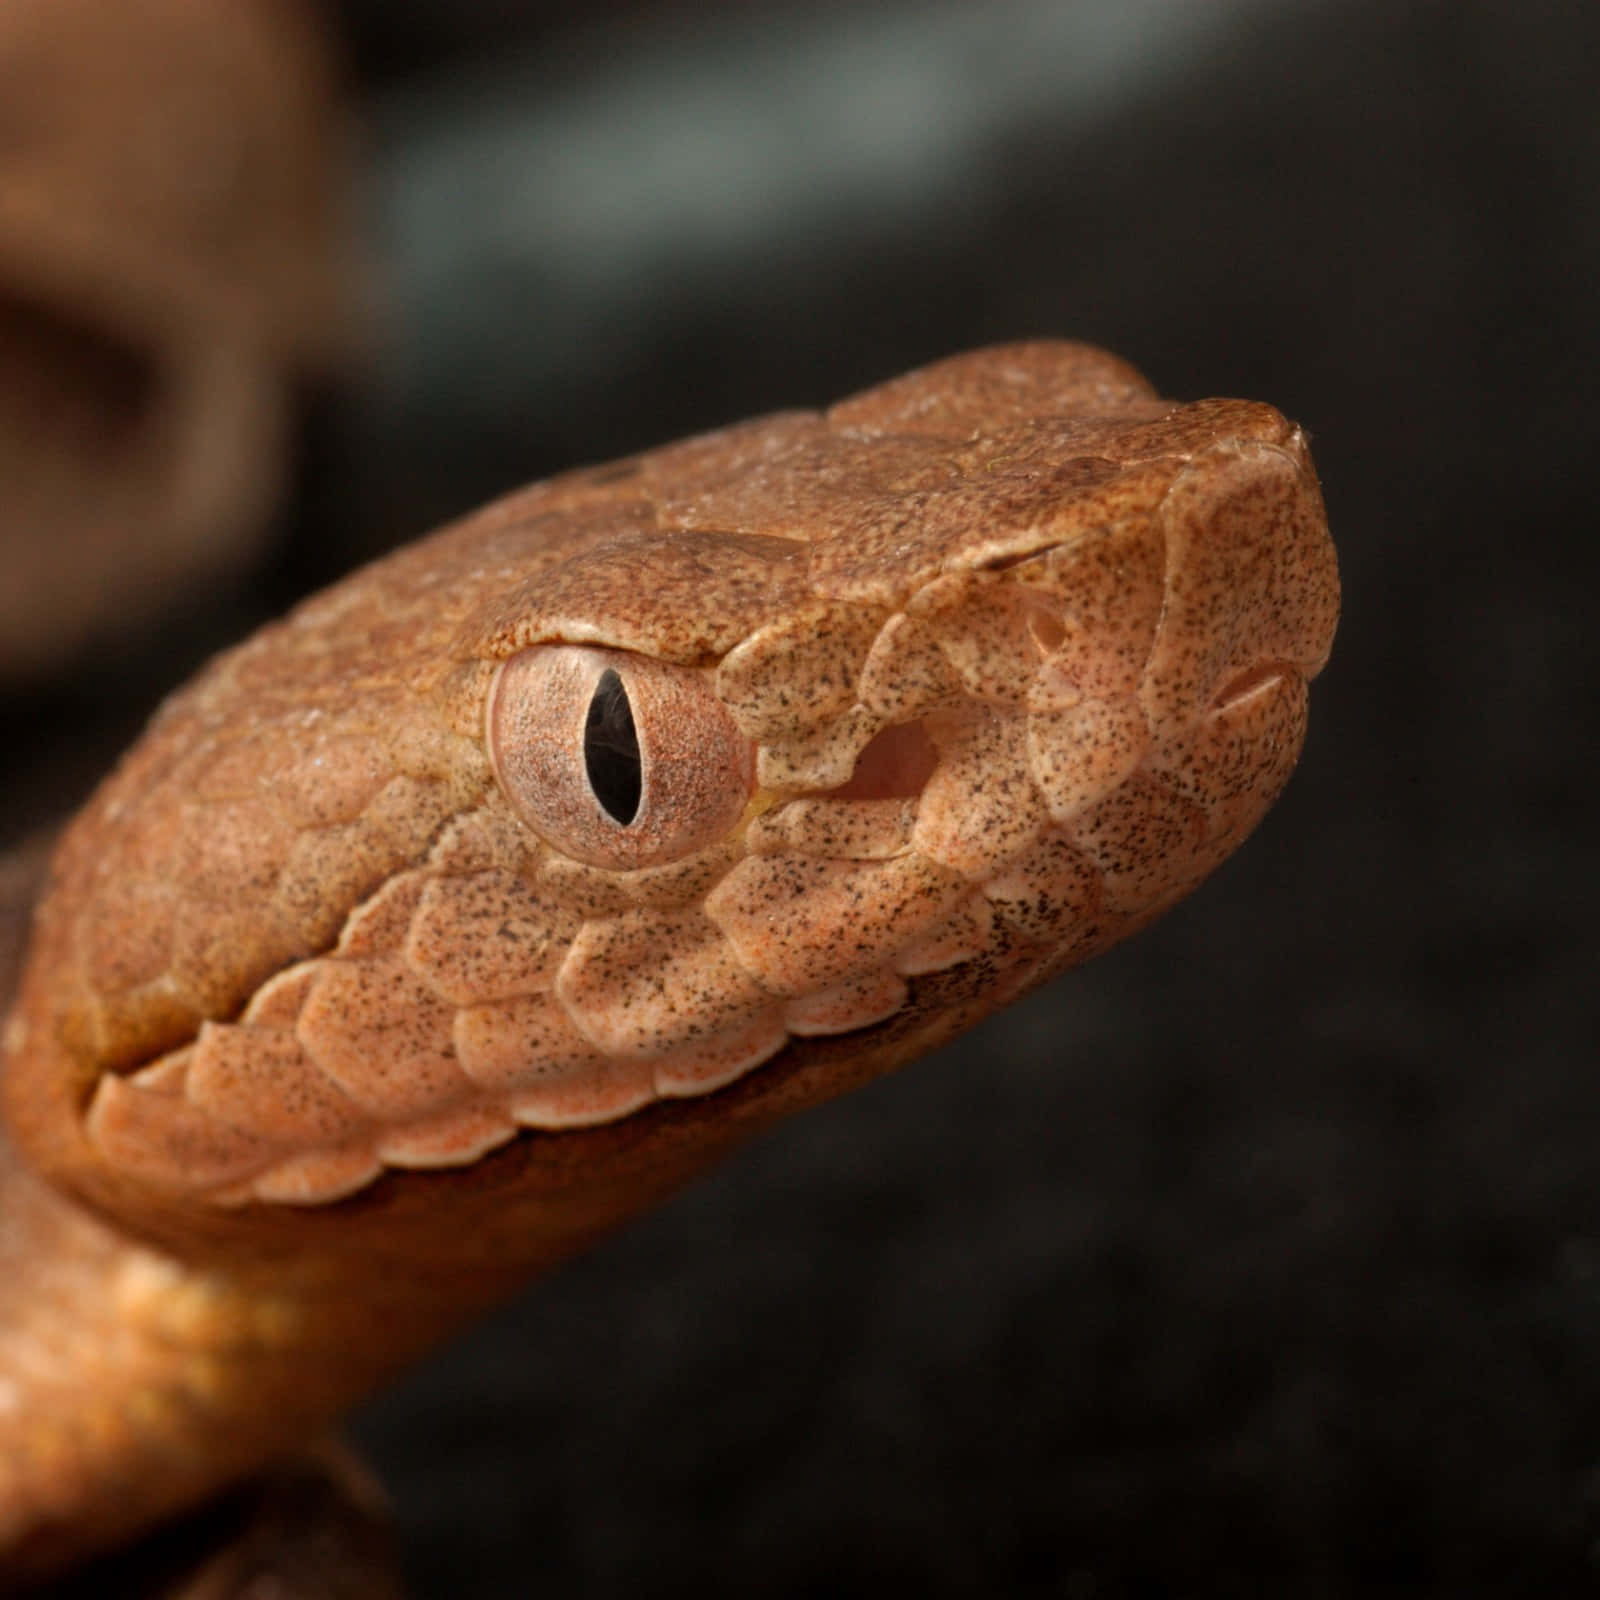 A Close-up of a Copperhead Snake